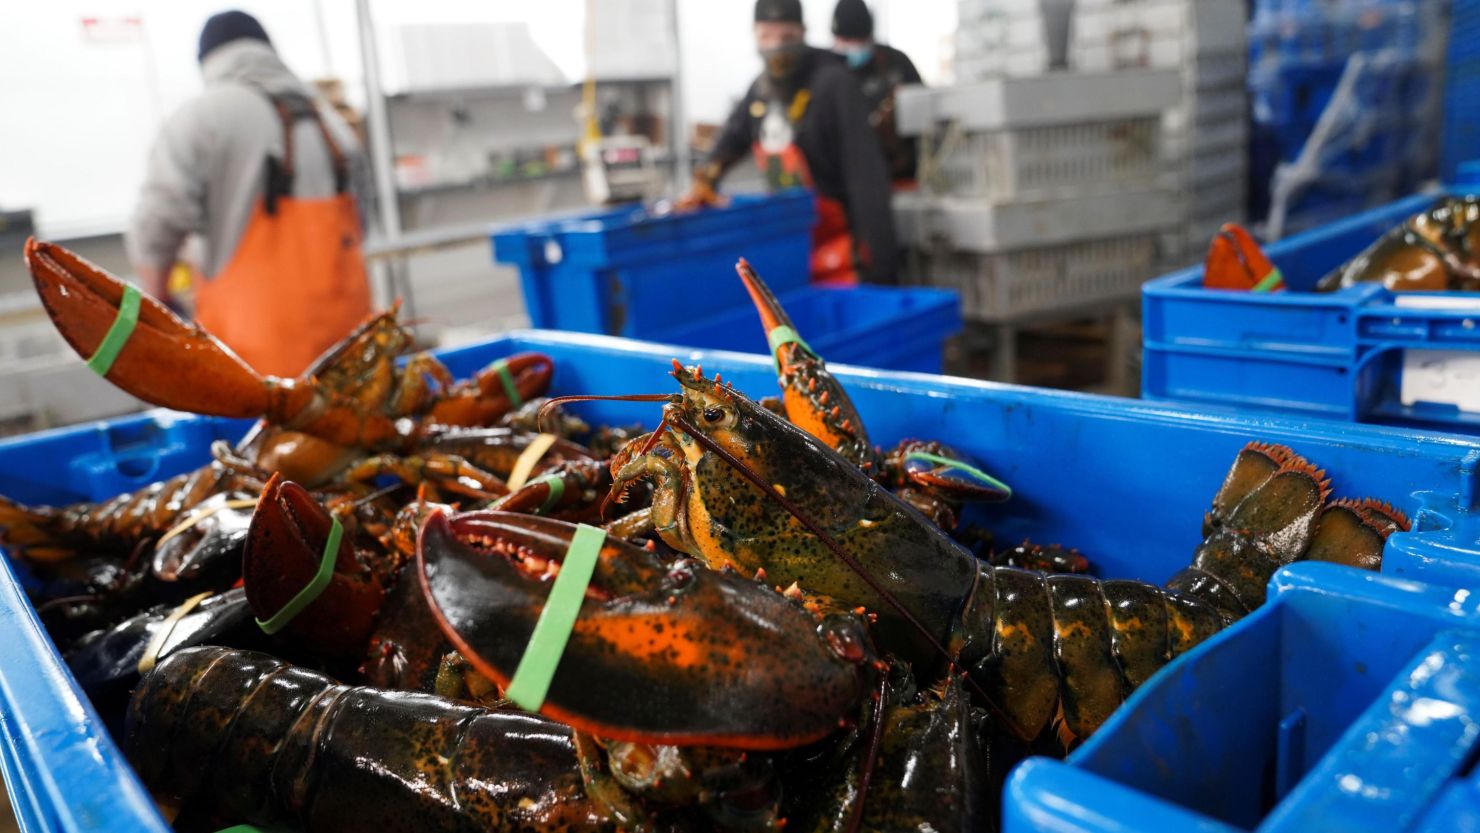 Workers sort lobsters by size at The Lobster Co. in Arundel, Maine.